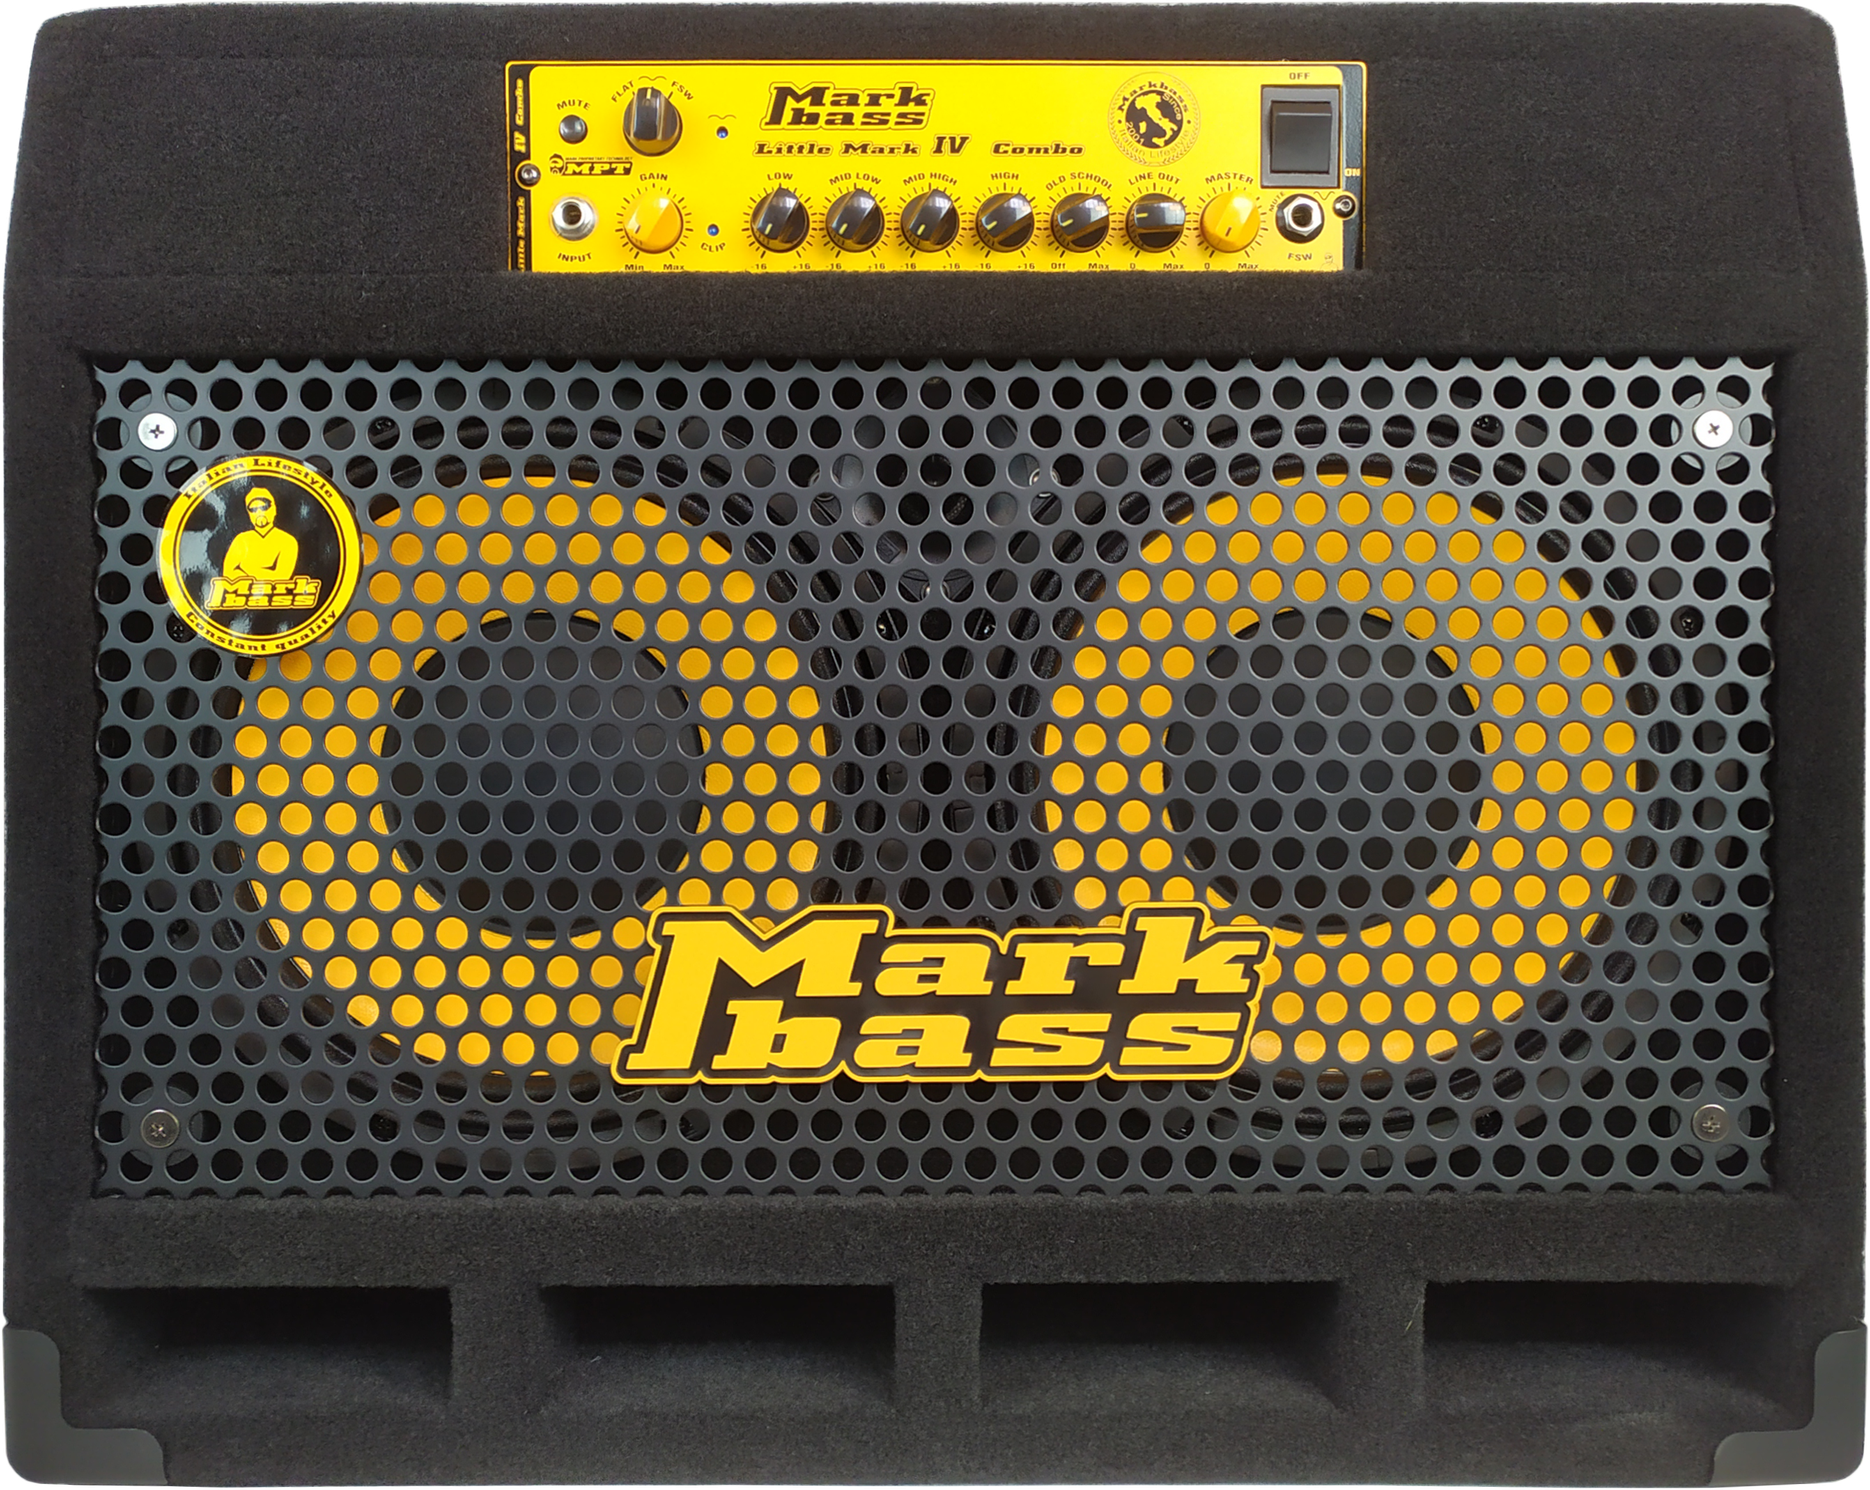 Markbass Cmd 102p Iv 2x10 500w - Combo voor basses - Main picture